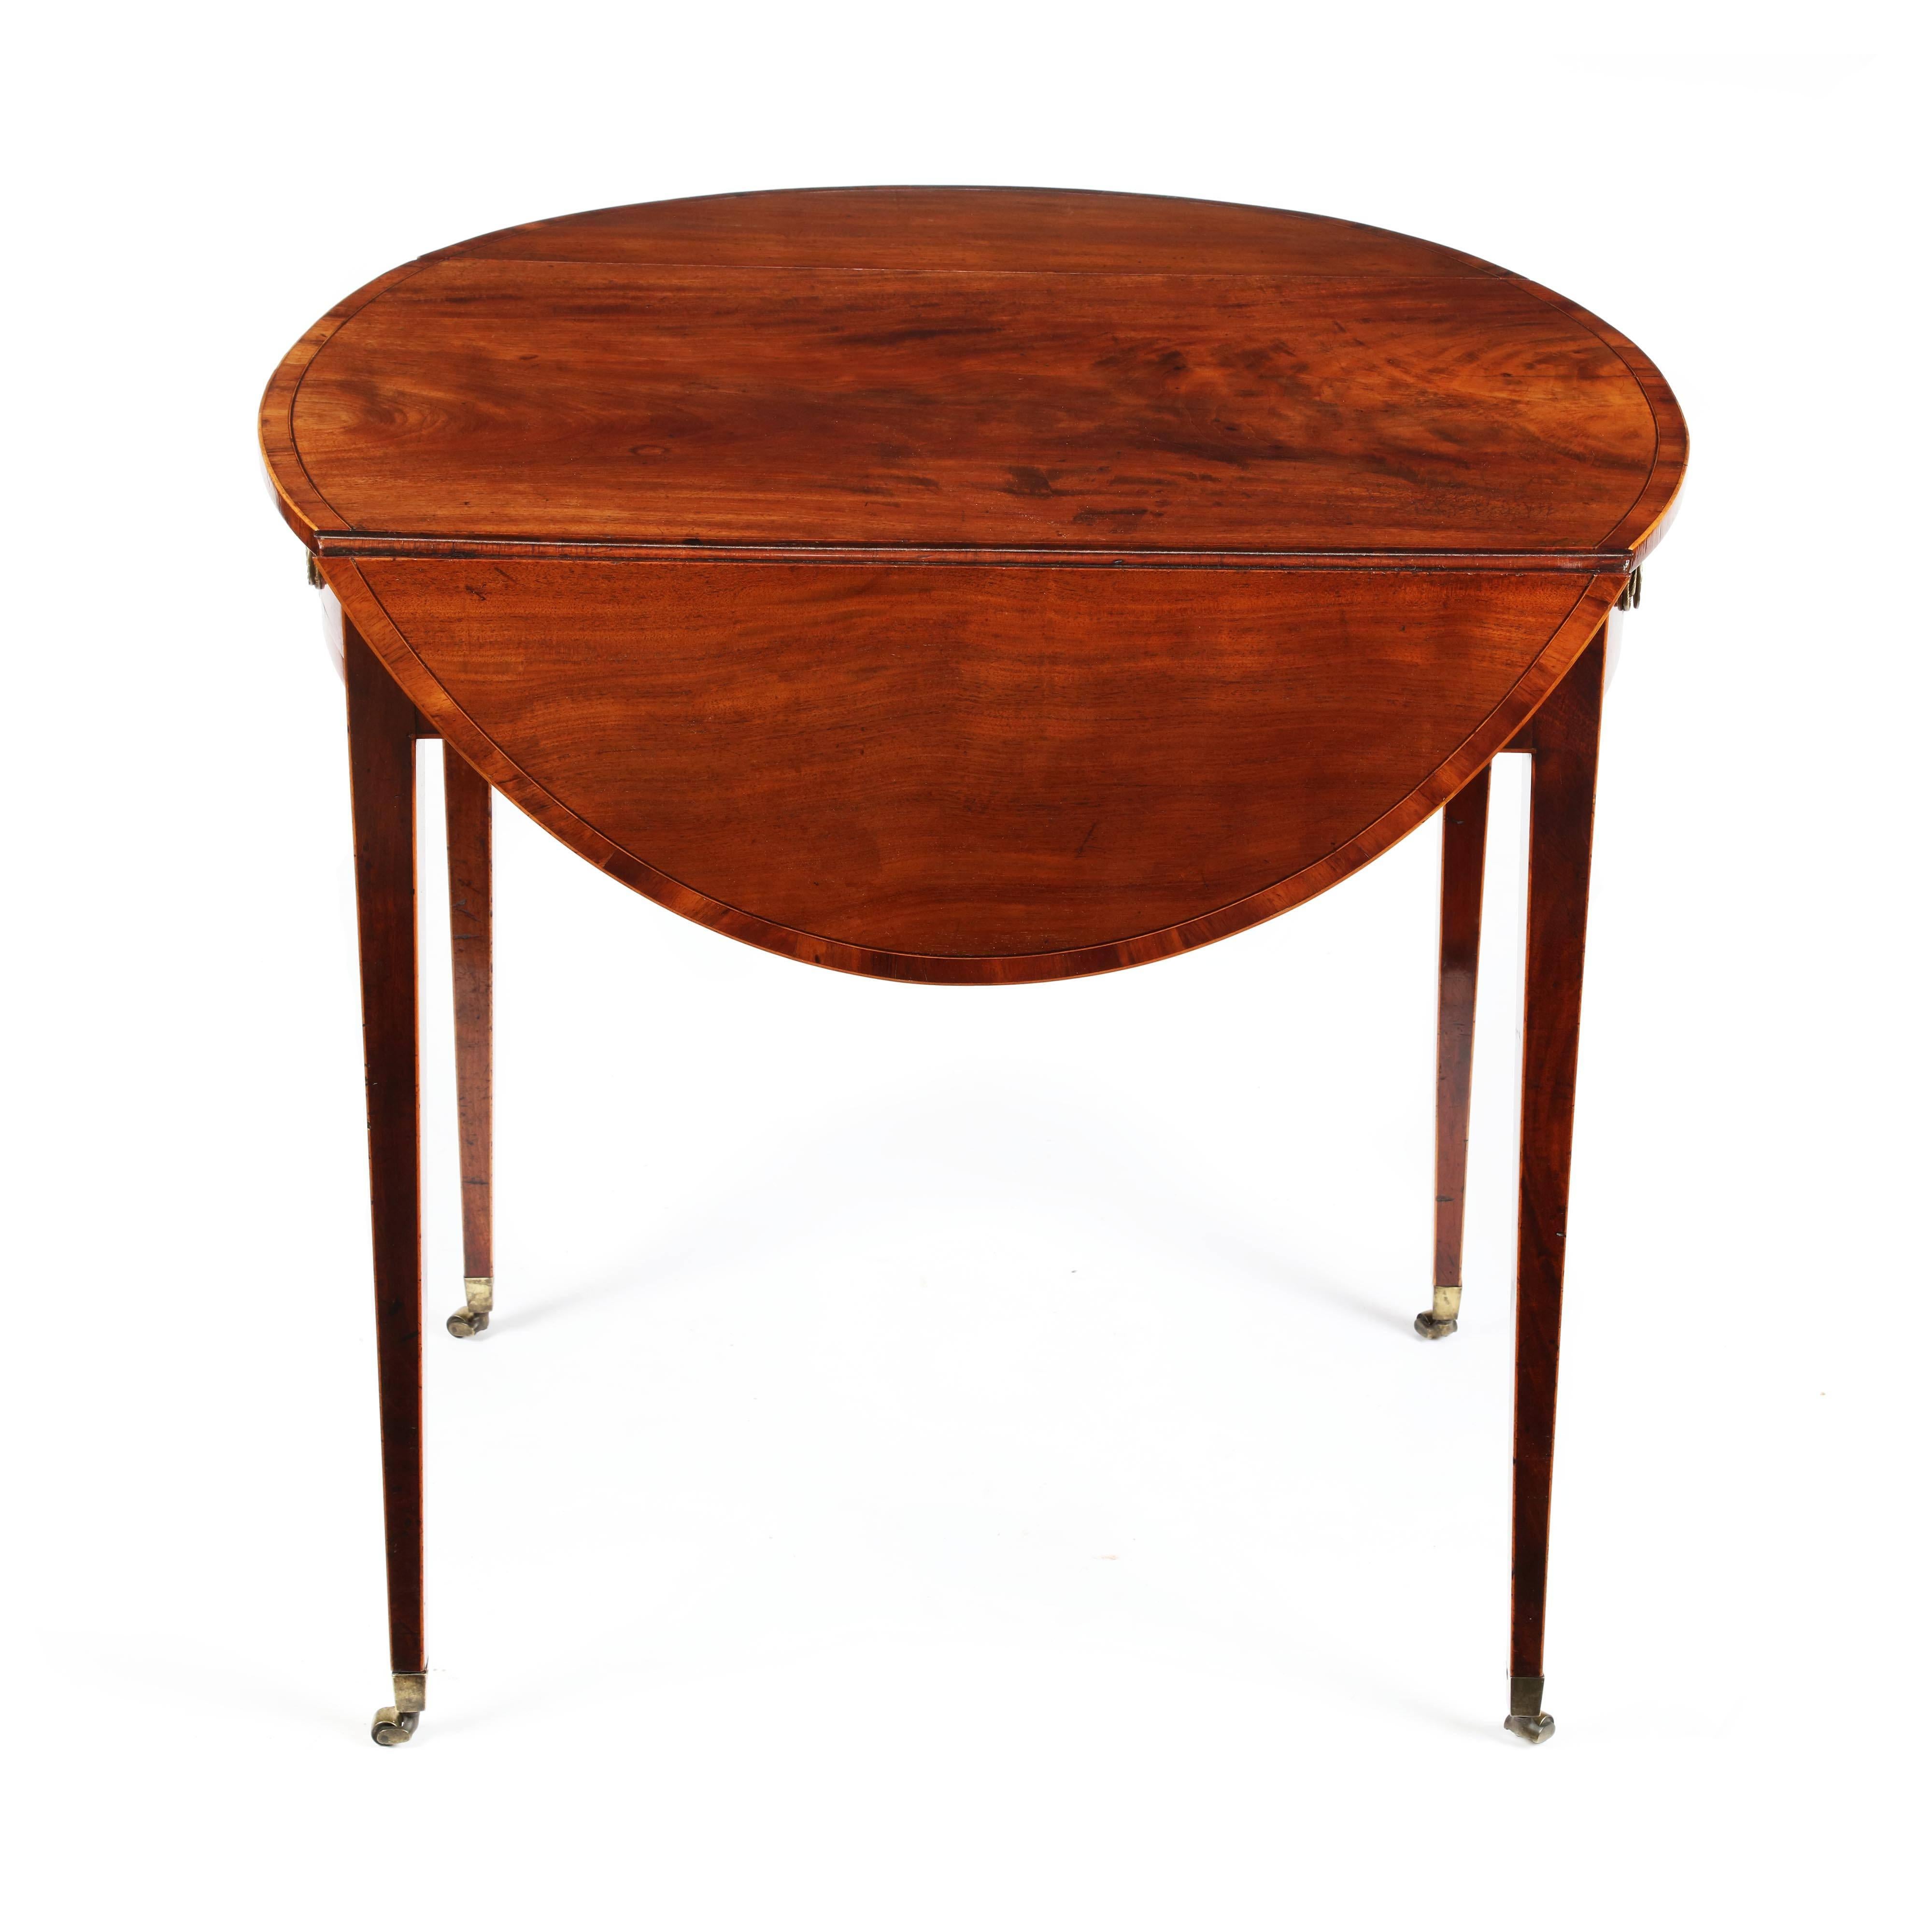 A fine George III mahogany and rosewood crossbanded oval pembroke table. The top of oval form with a well figured mahogany top, cross-banded around the circumference with rosewood, strung with box and ebony. The frieze with bow fronted back and